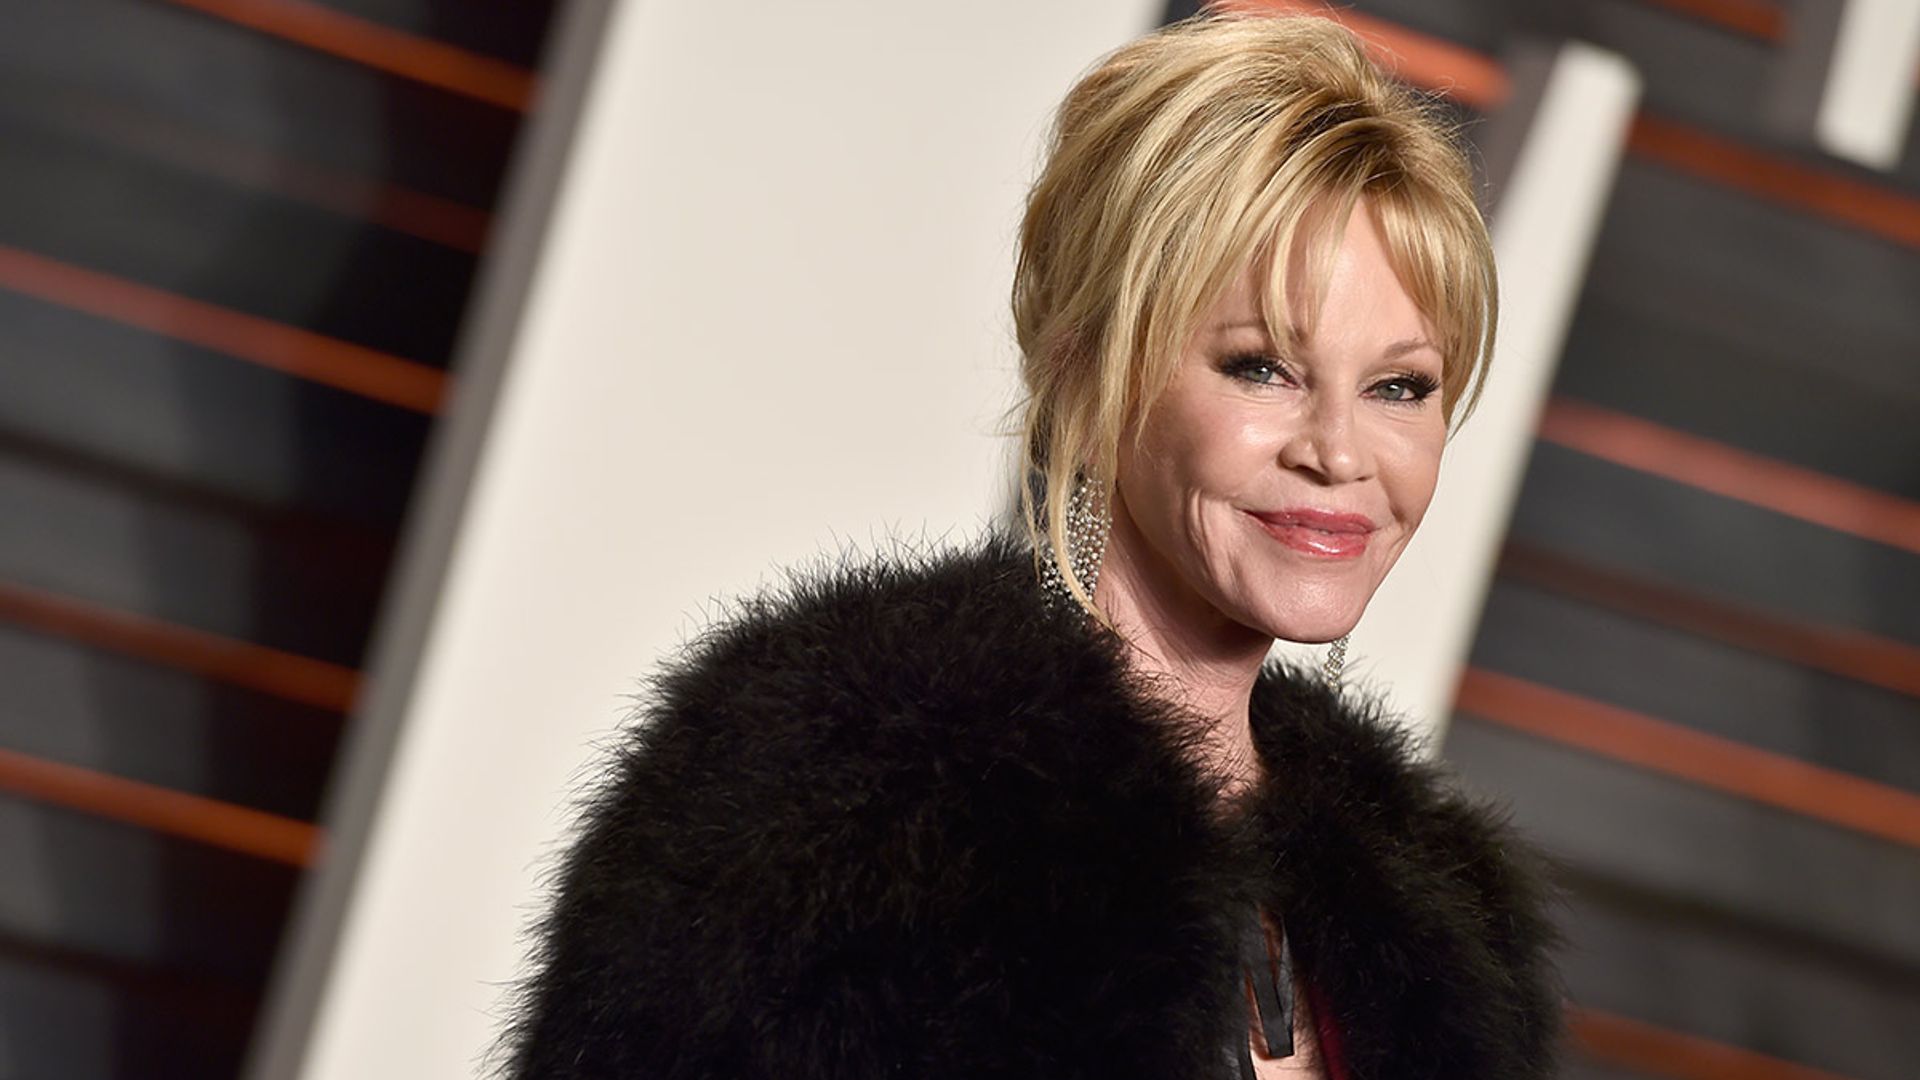 Melanie Griffith 63 Stuns Fans By Stripping To Underwear For Candid